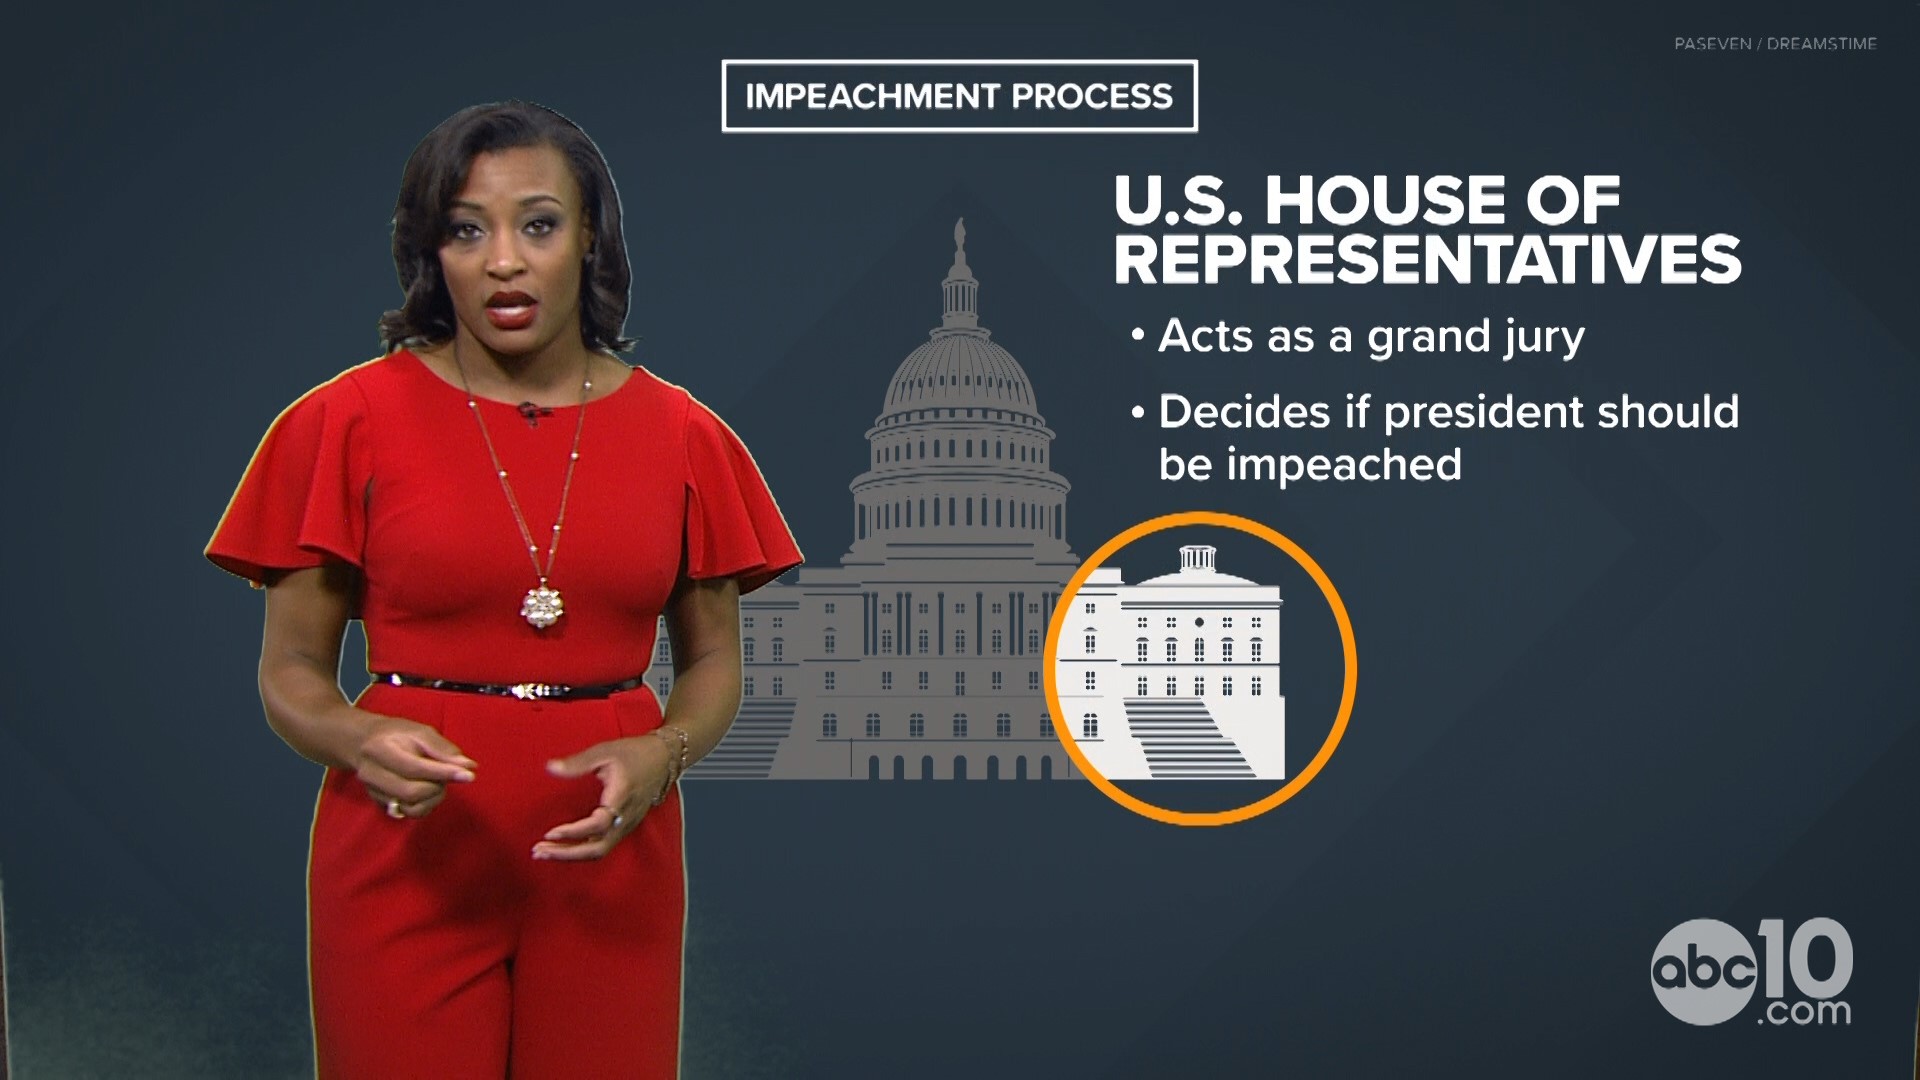 Keristen Holmes walks us through the impeachment process as it could move from the U.S. House to the Senate.